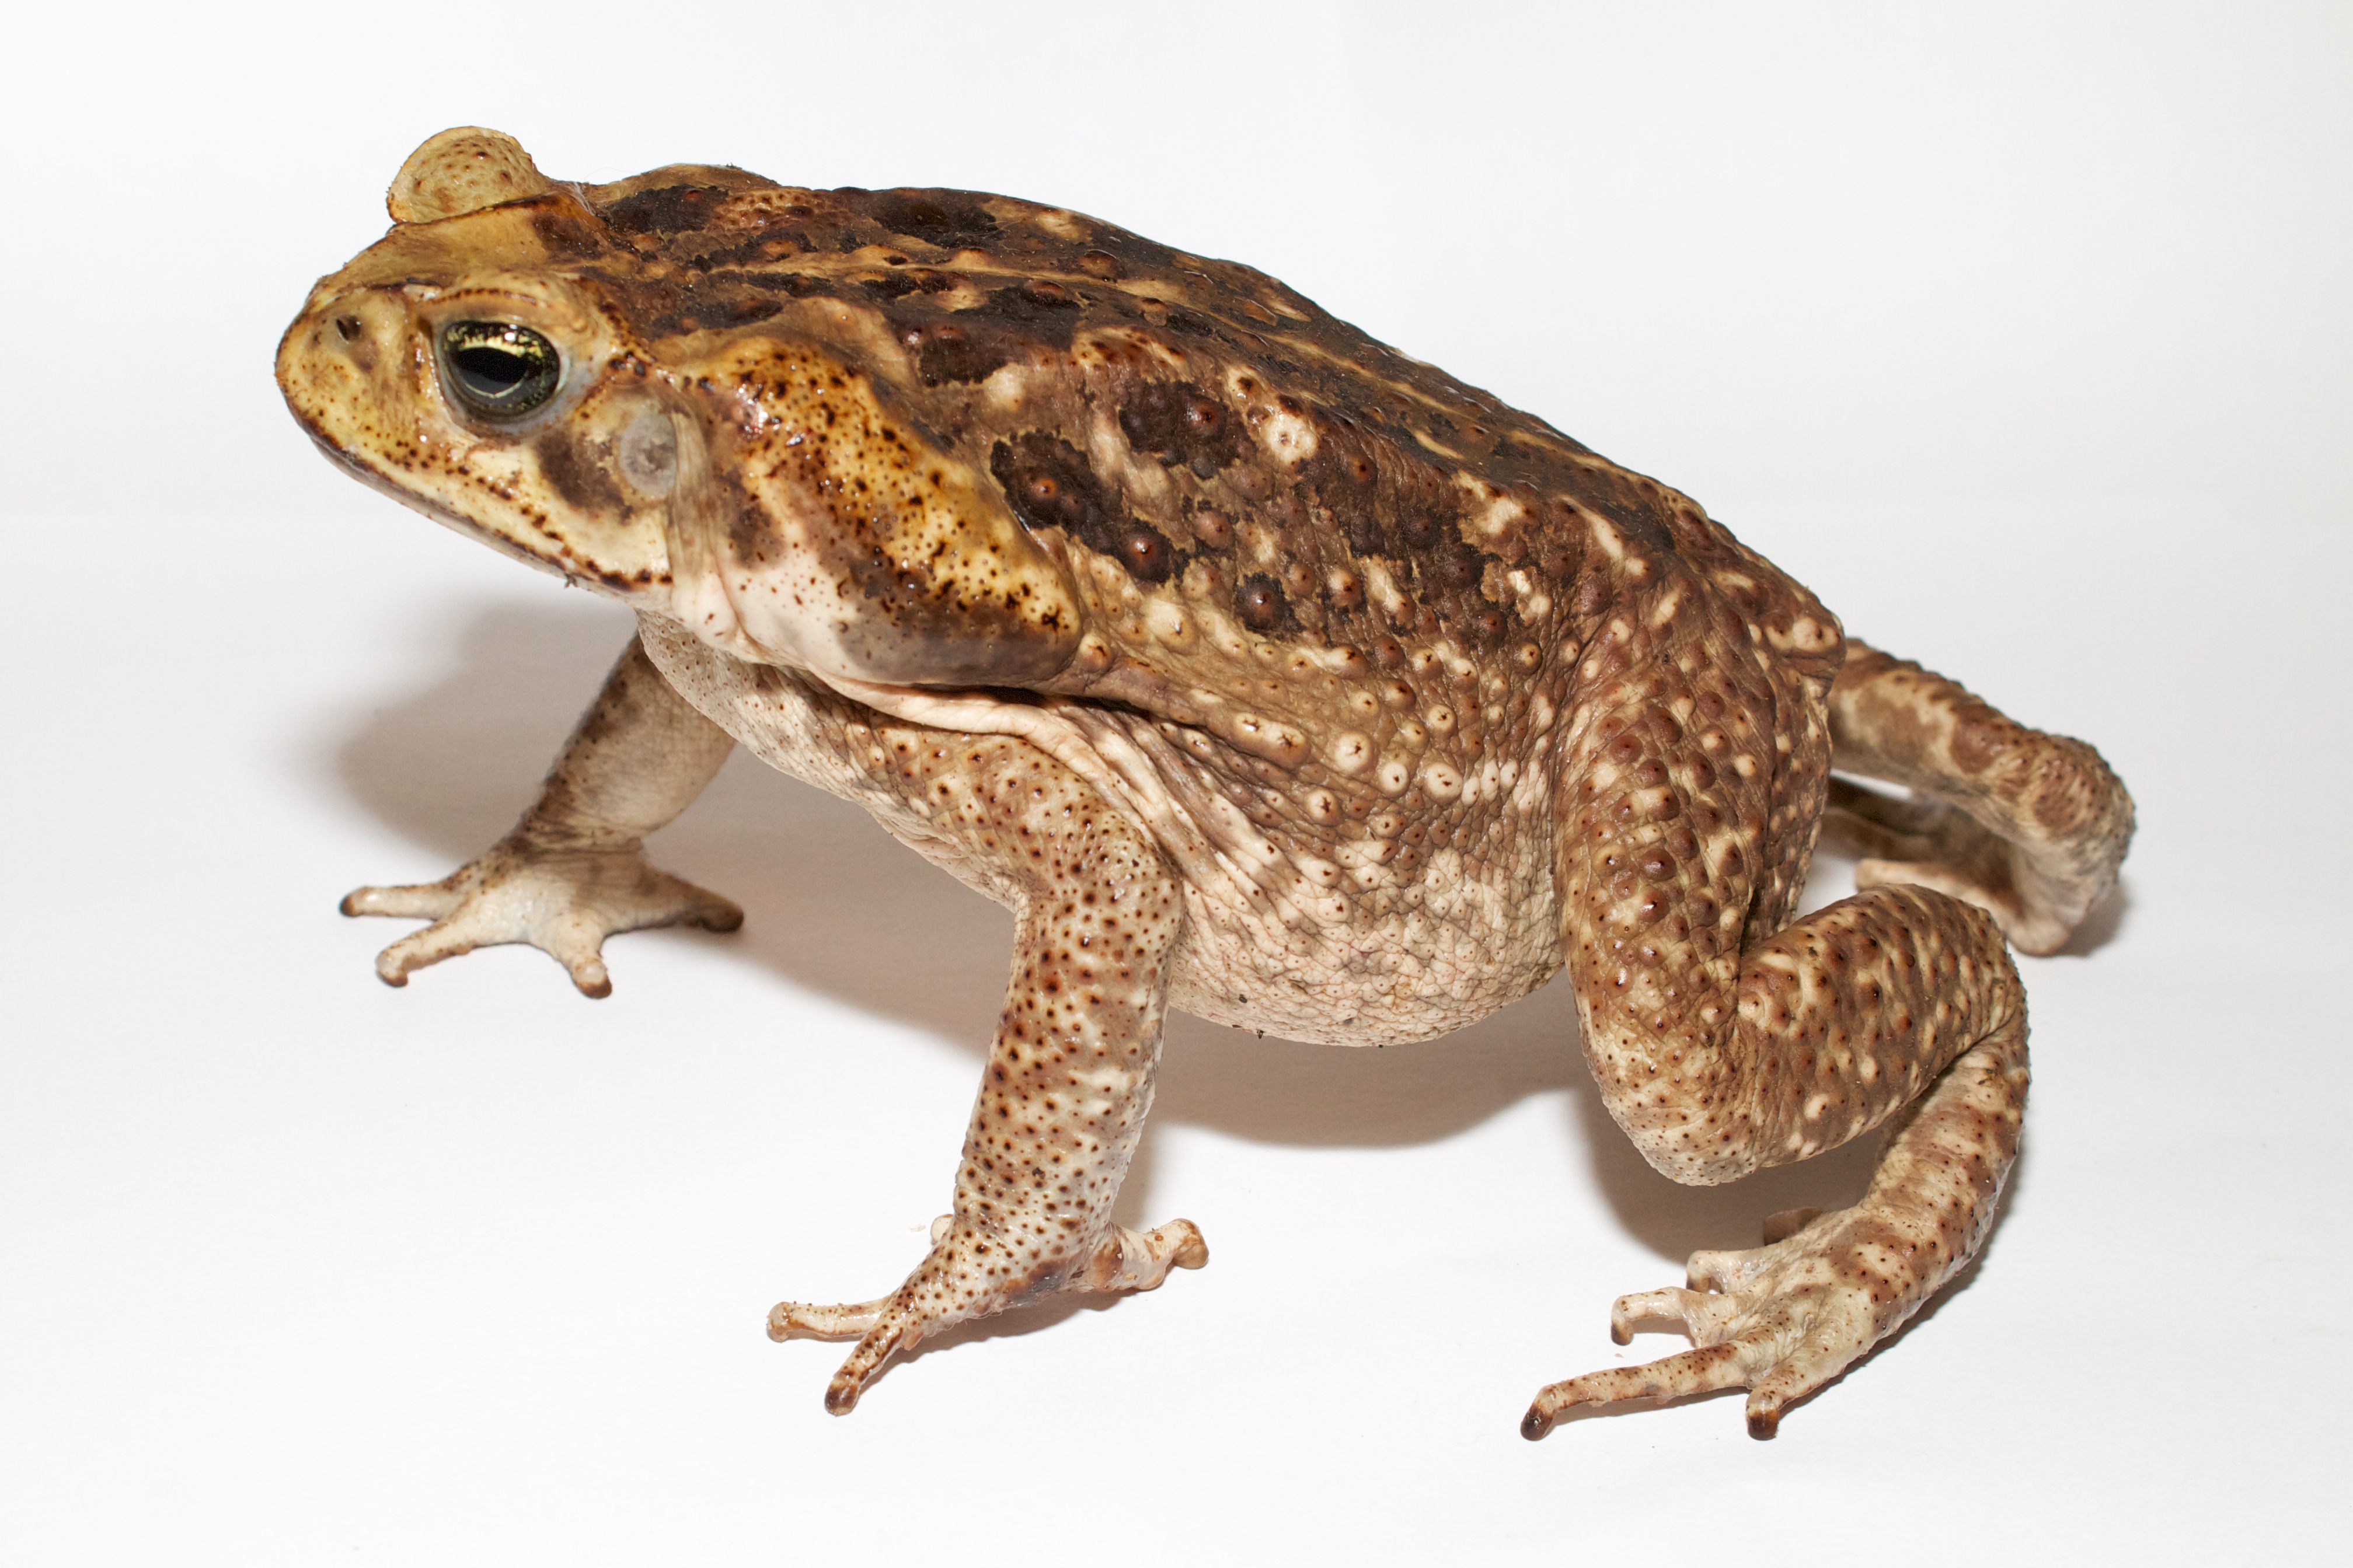 Adult Cane toad